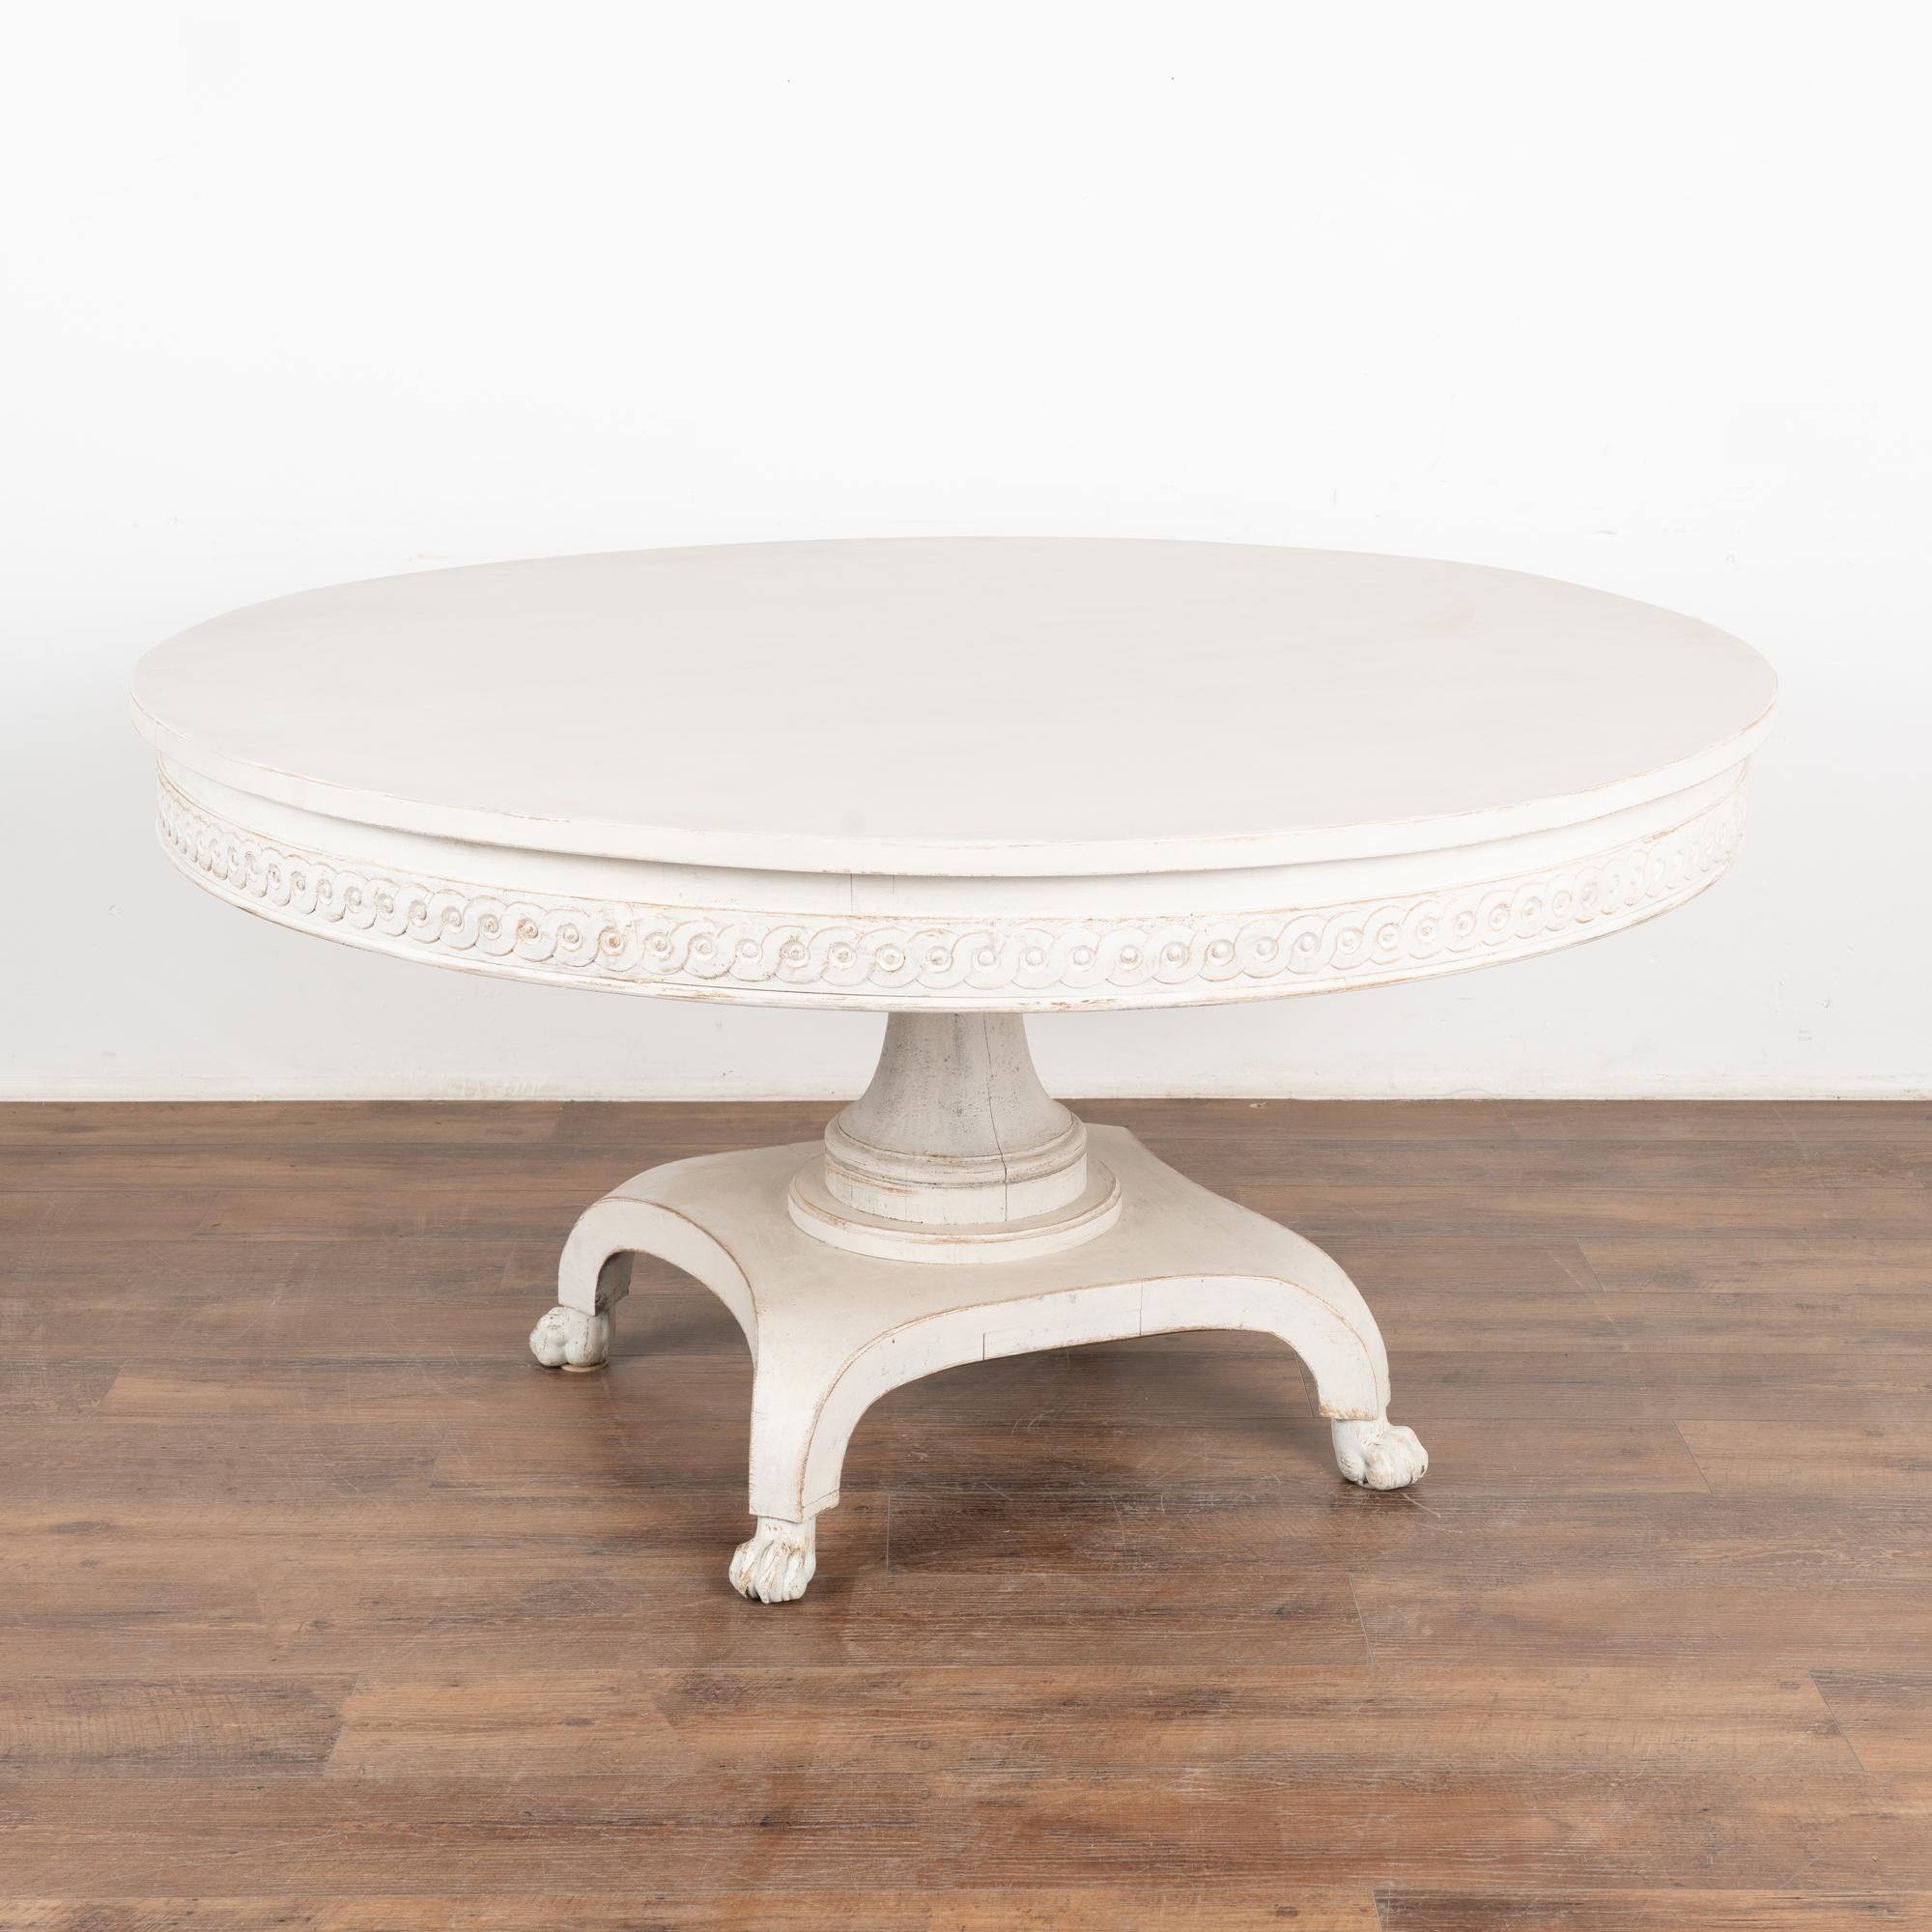 Large 5' Round White Painted Pedestal Table, Sweden circa 1920 For Sale 6